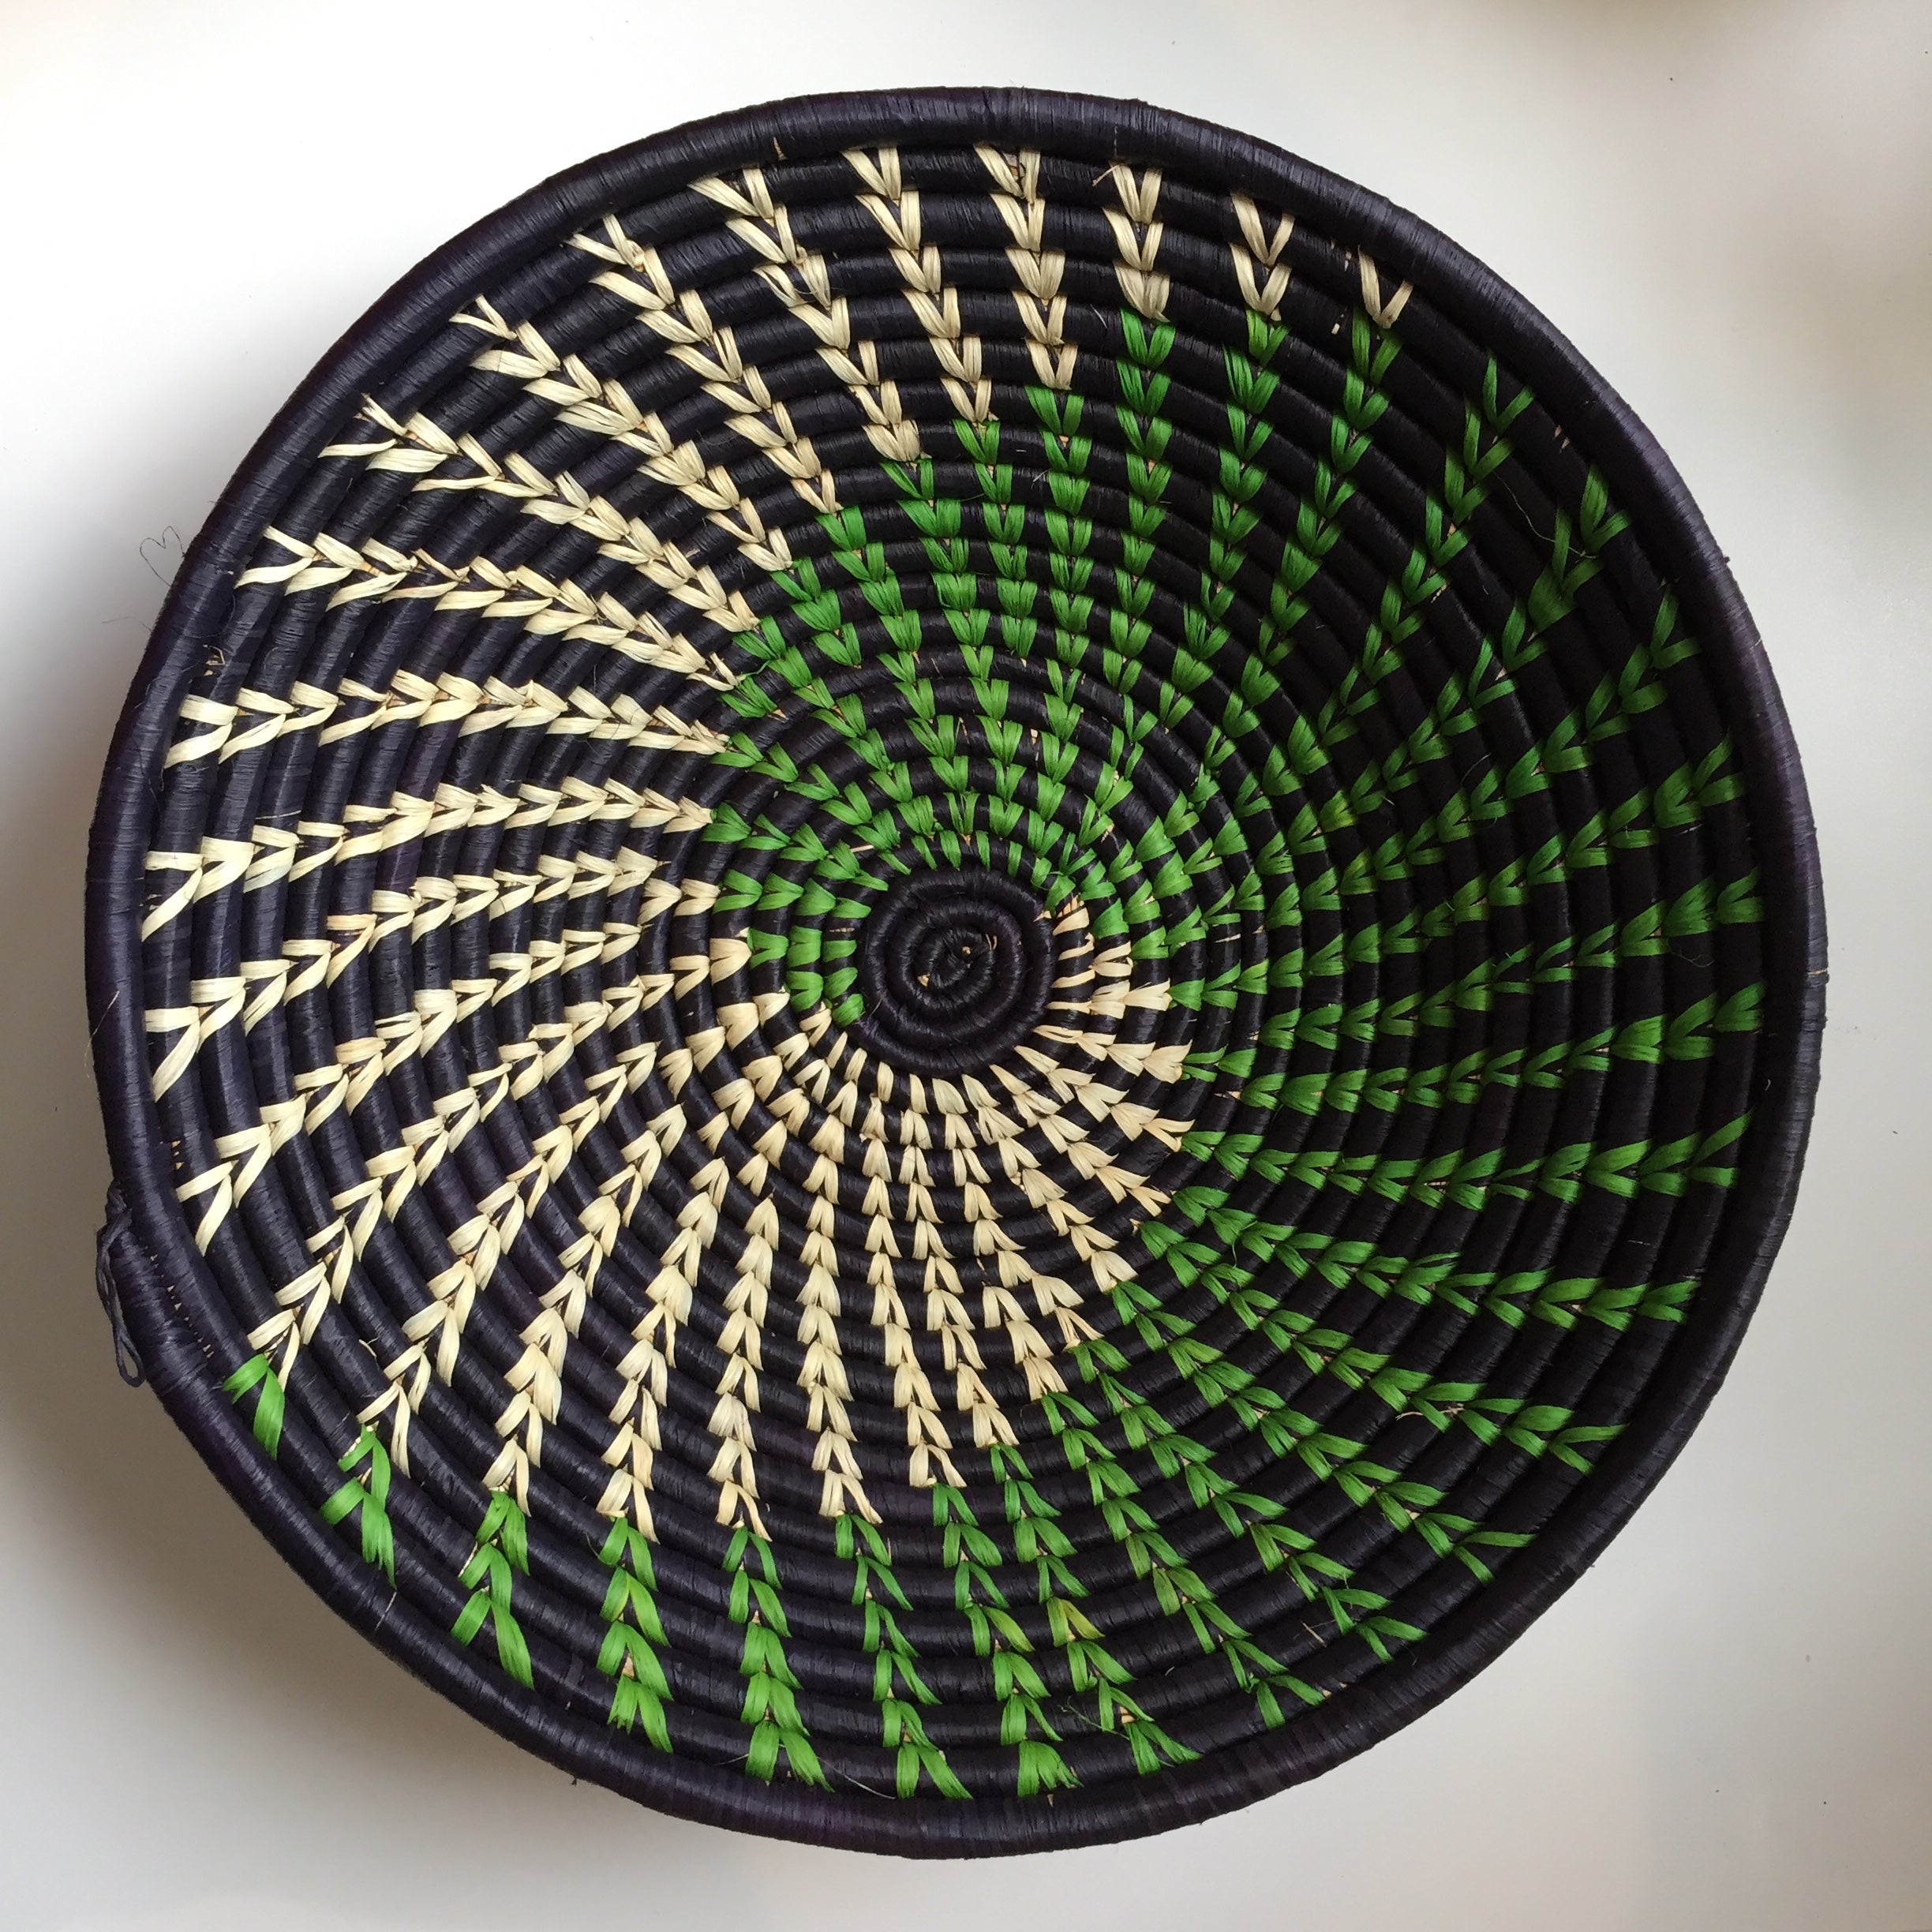 Green and black swirl woven bowls